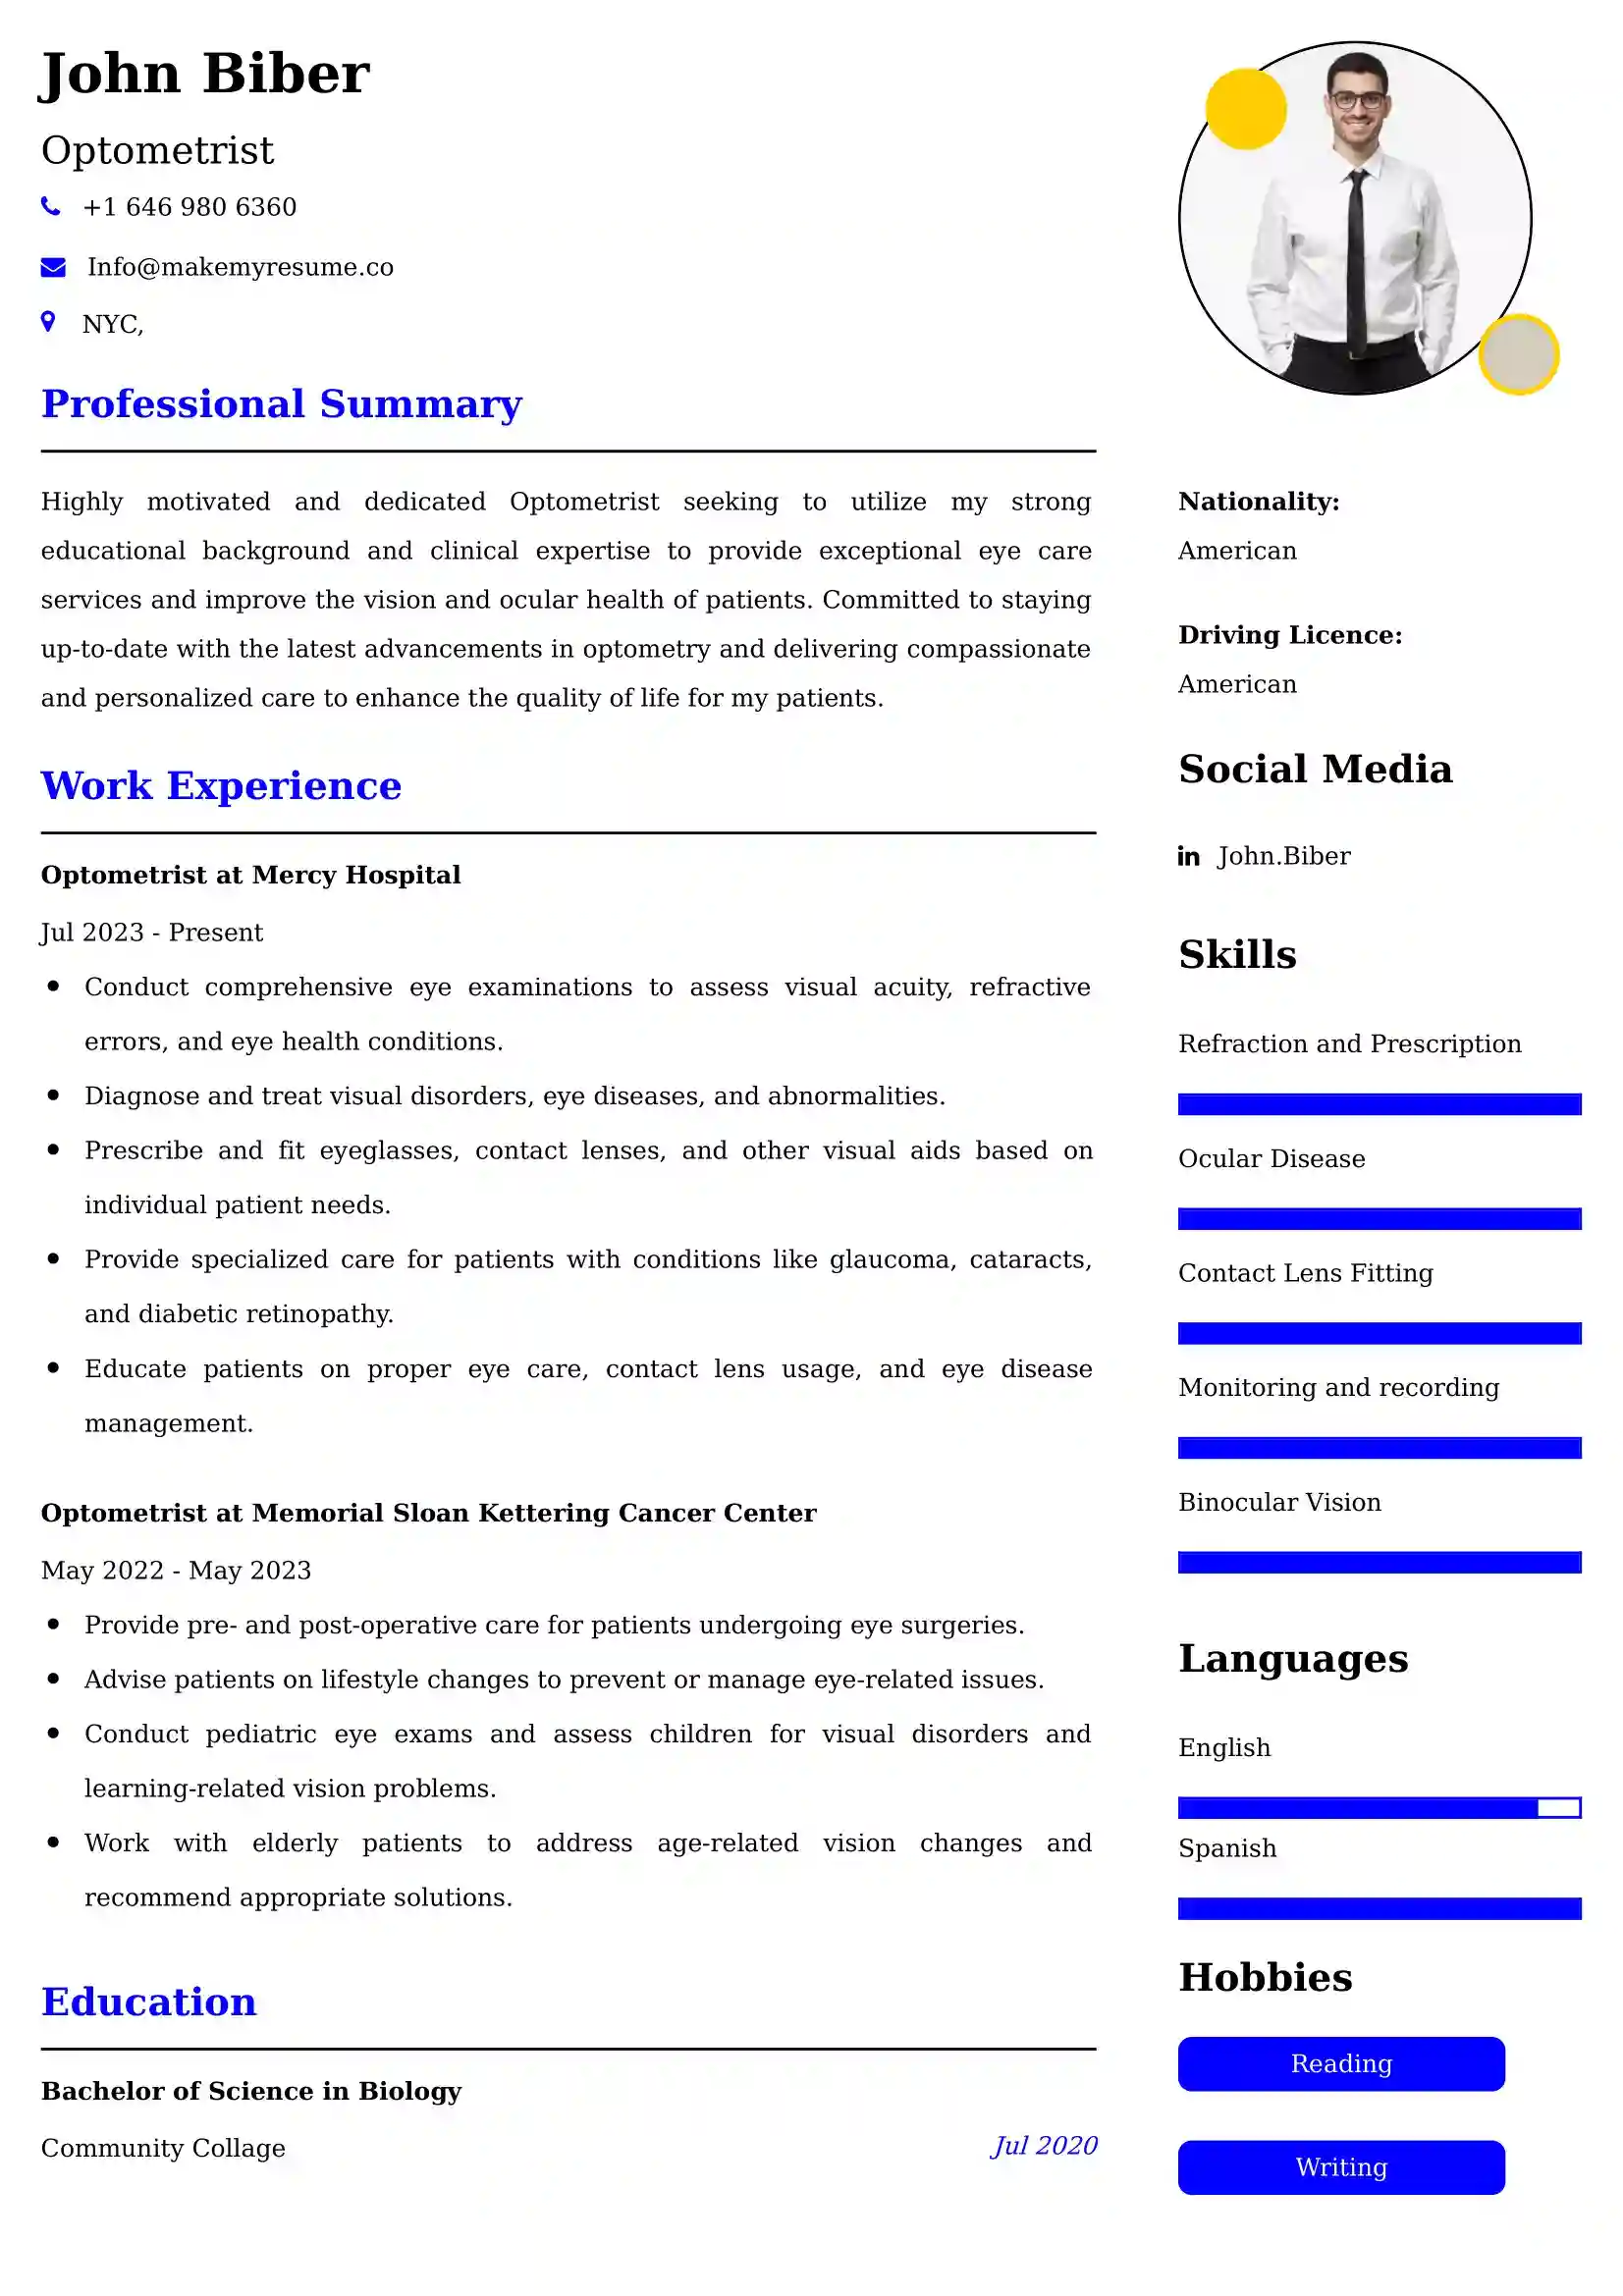 Optometrist Resume Examples - Australian Format and Tips